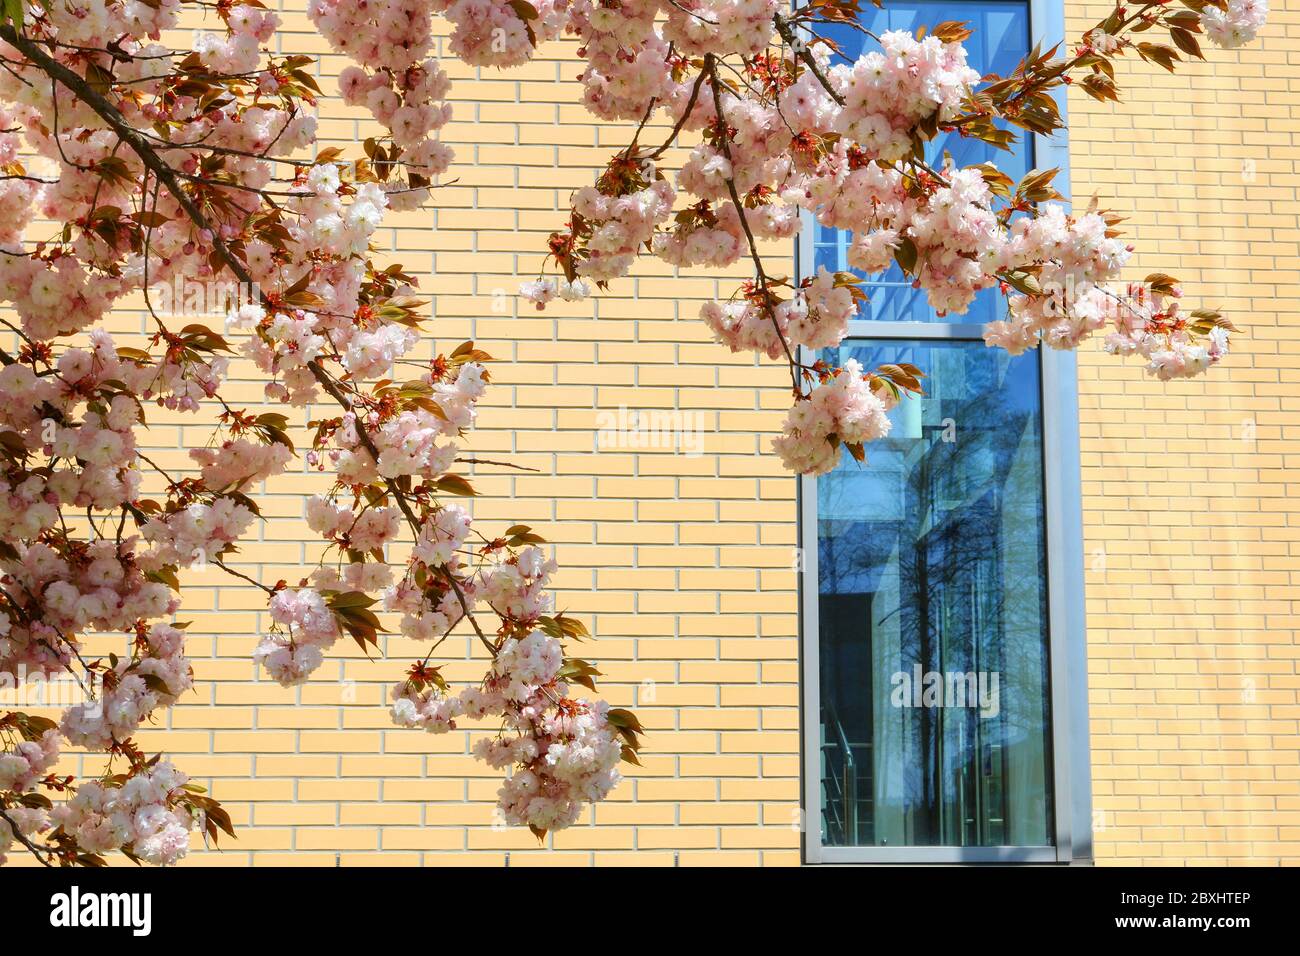 Beautiful blooming shrubs at the campus of The Jagiellonian University in Krakow, Poland. Stock Photo